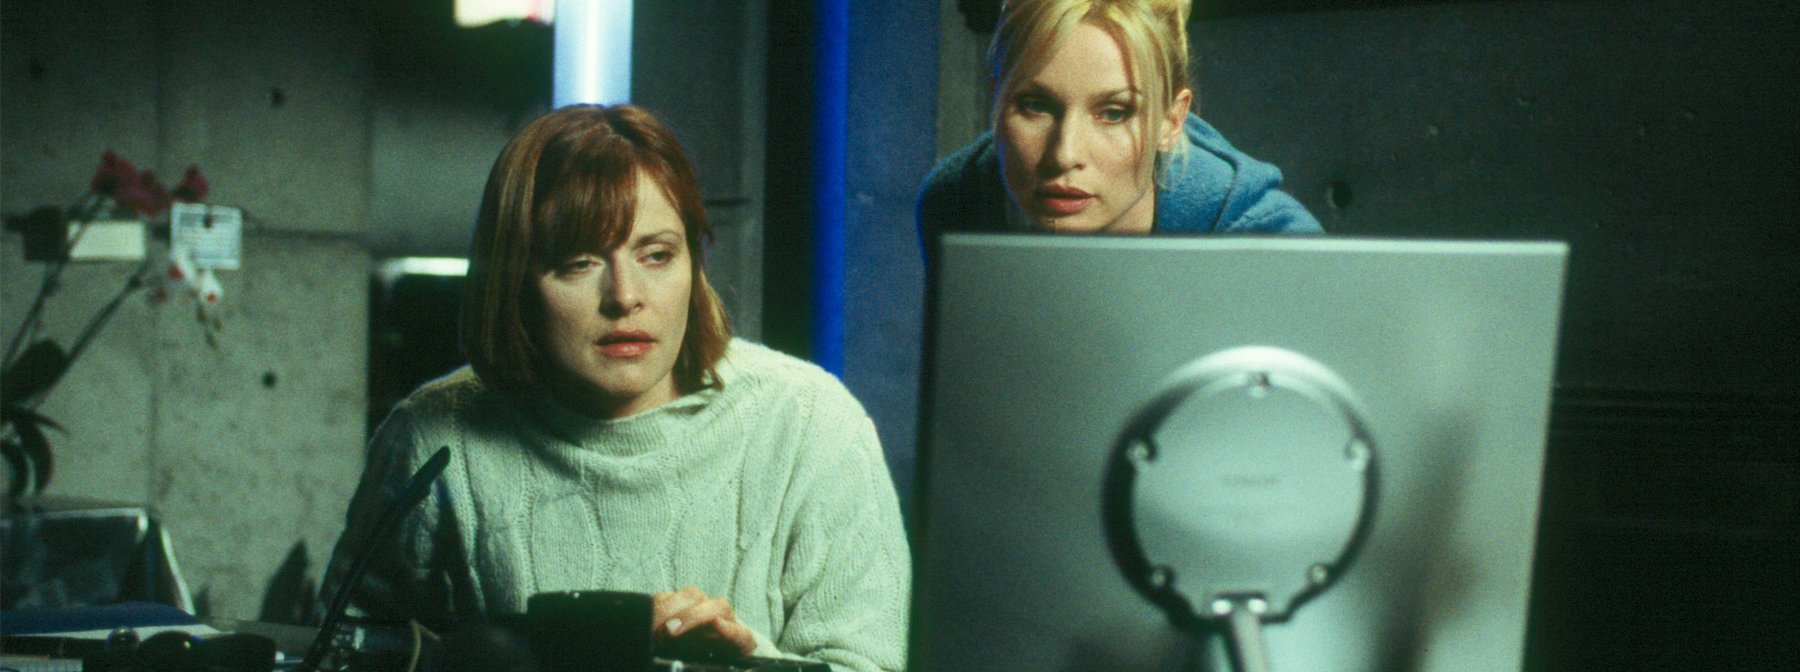 8 Films on the Dangers of the Internet